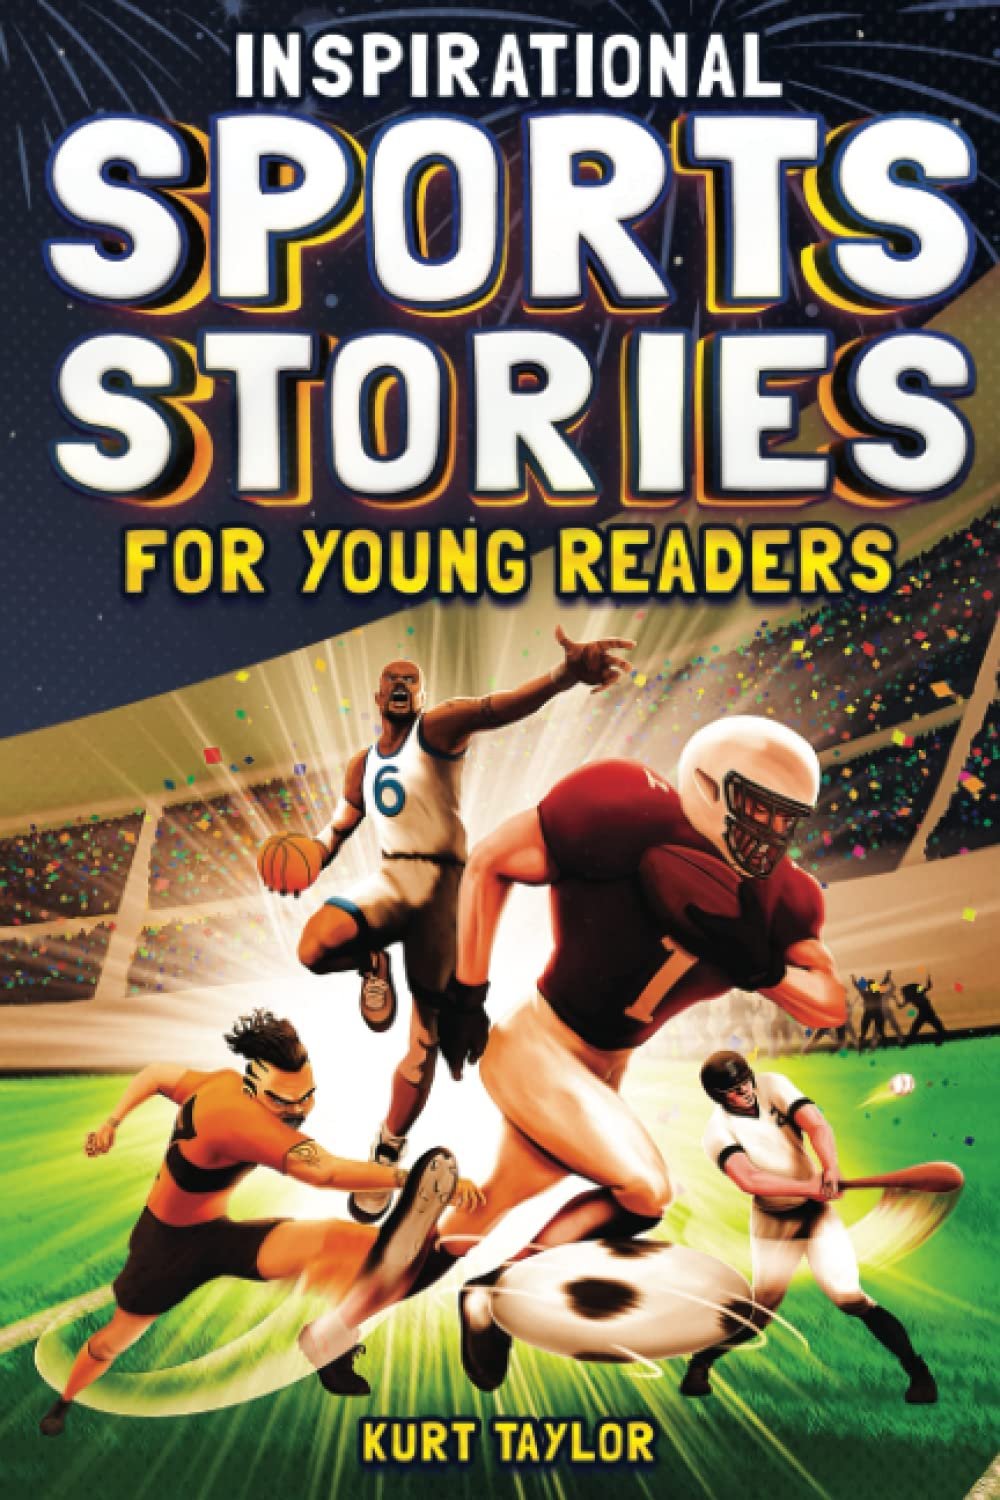 Inspirational Sports Stories for Young Readers: How 12 World-Class Athletes Overcame Challenges and Rose to the Top     Paperback – November 4, 2022